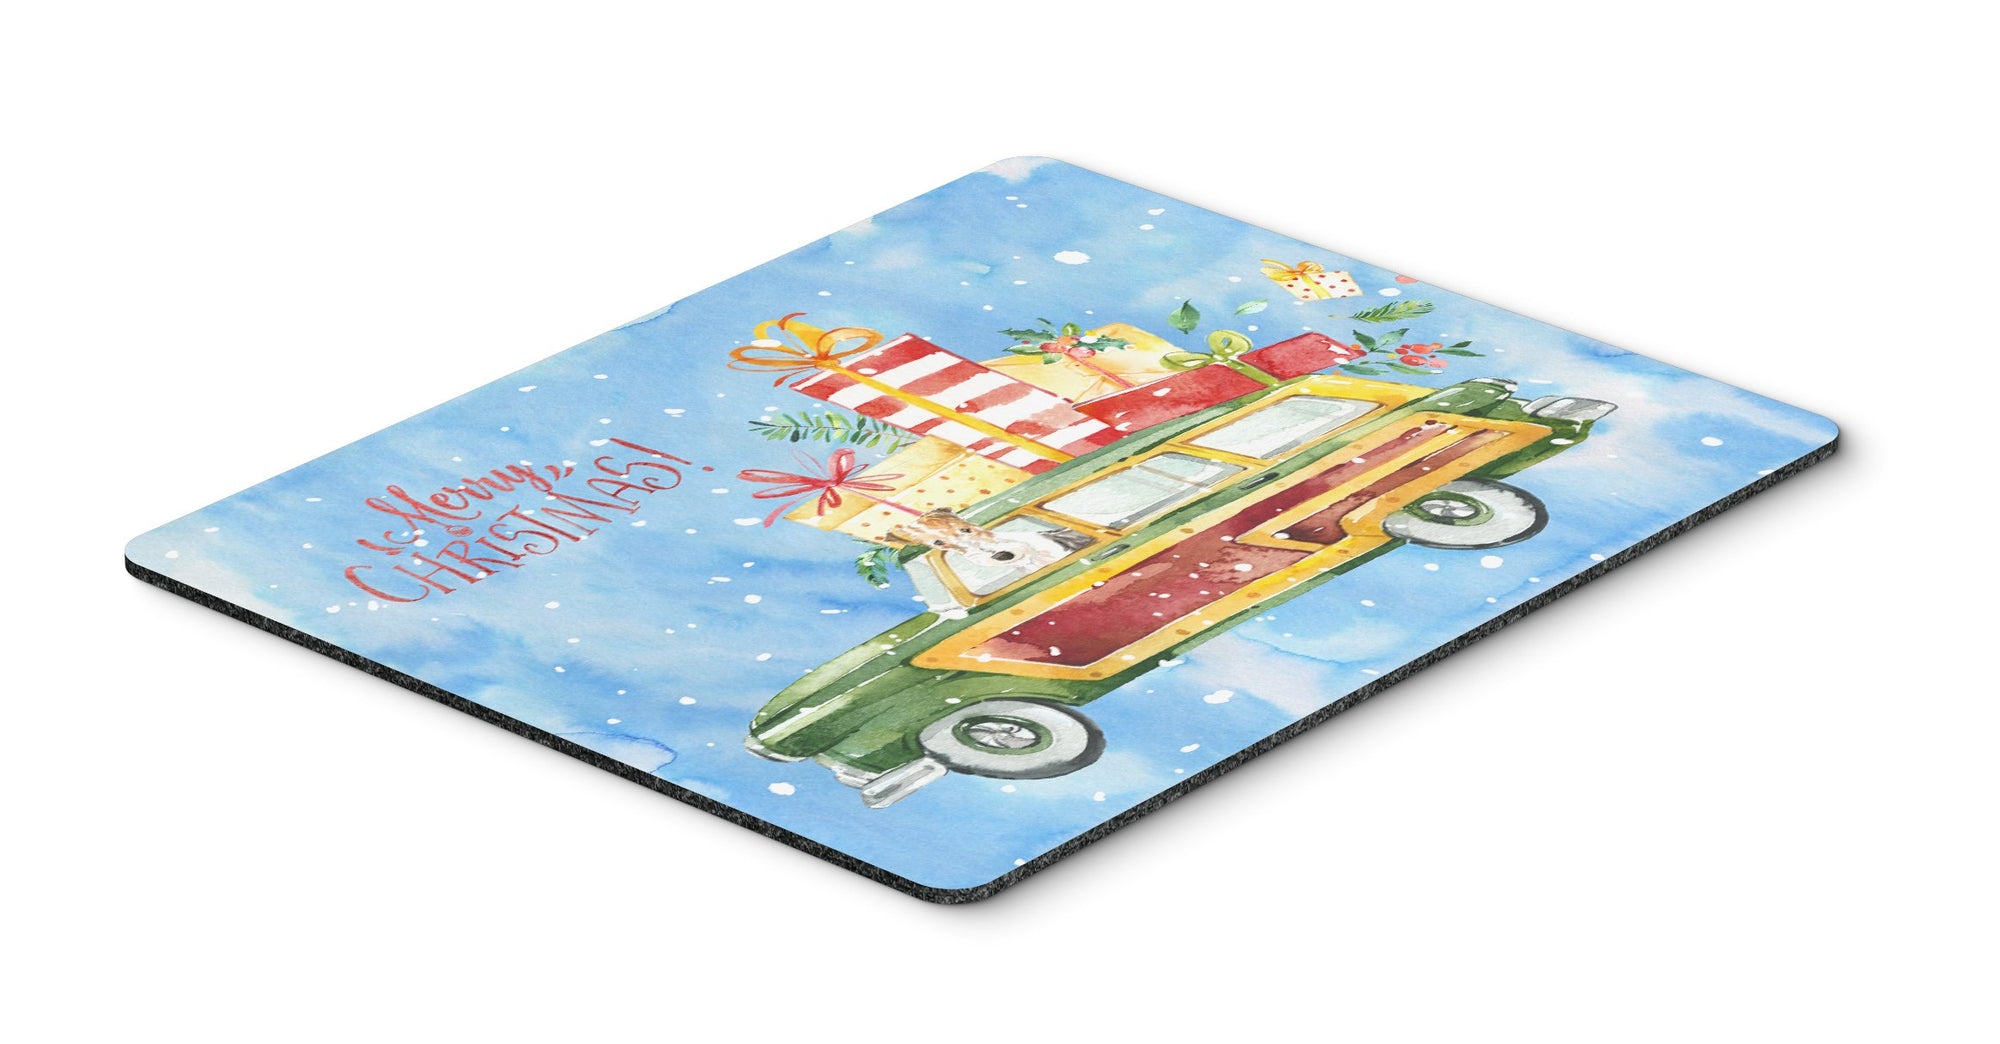 Merry Christmas Fox Terrier Mouse Pad, Hot Pad or Trivet CK2430MP by Caroline's Treasures